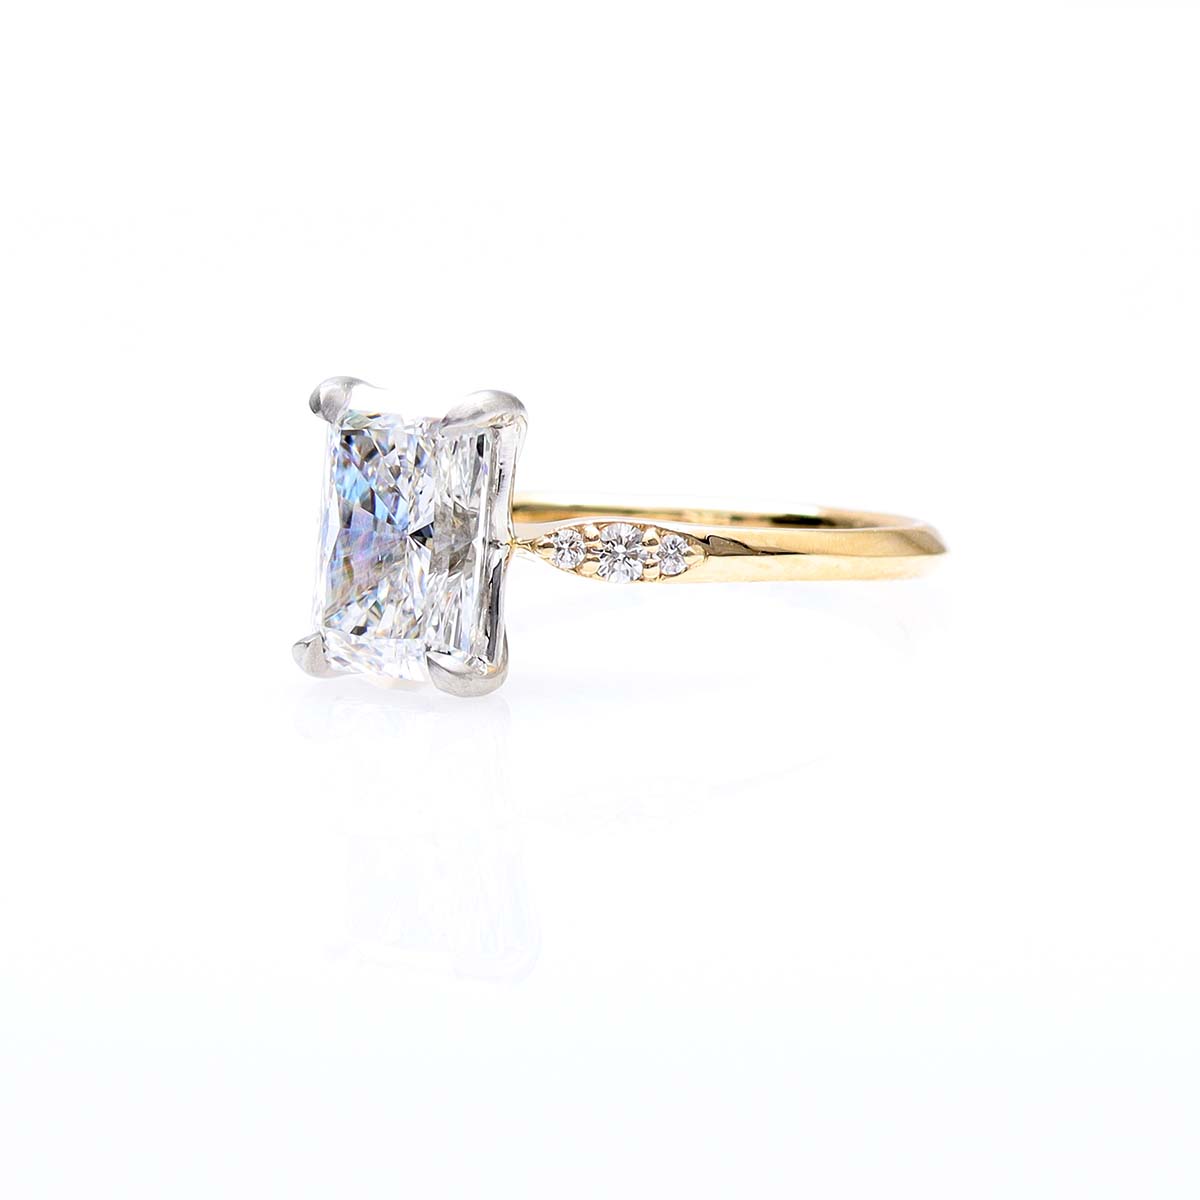 The Adrienne Edwardian Revival Engagement Ring #3616-2